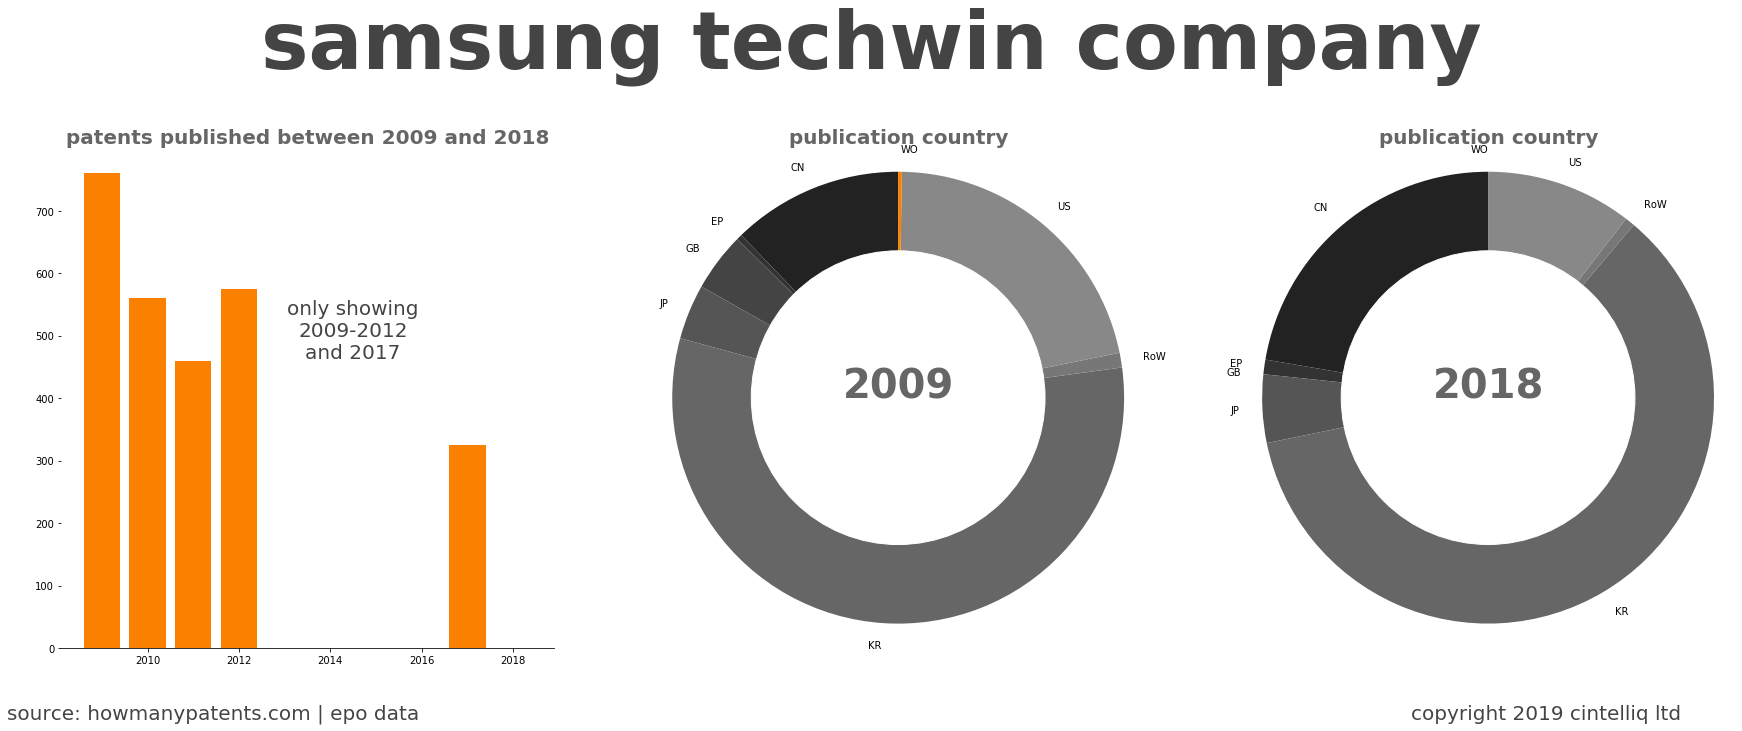 summary of patents for Samsung Techwin Company